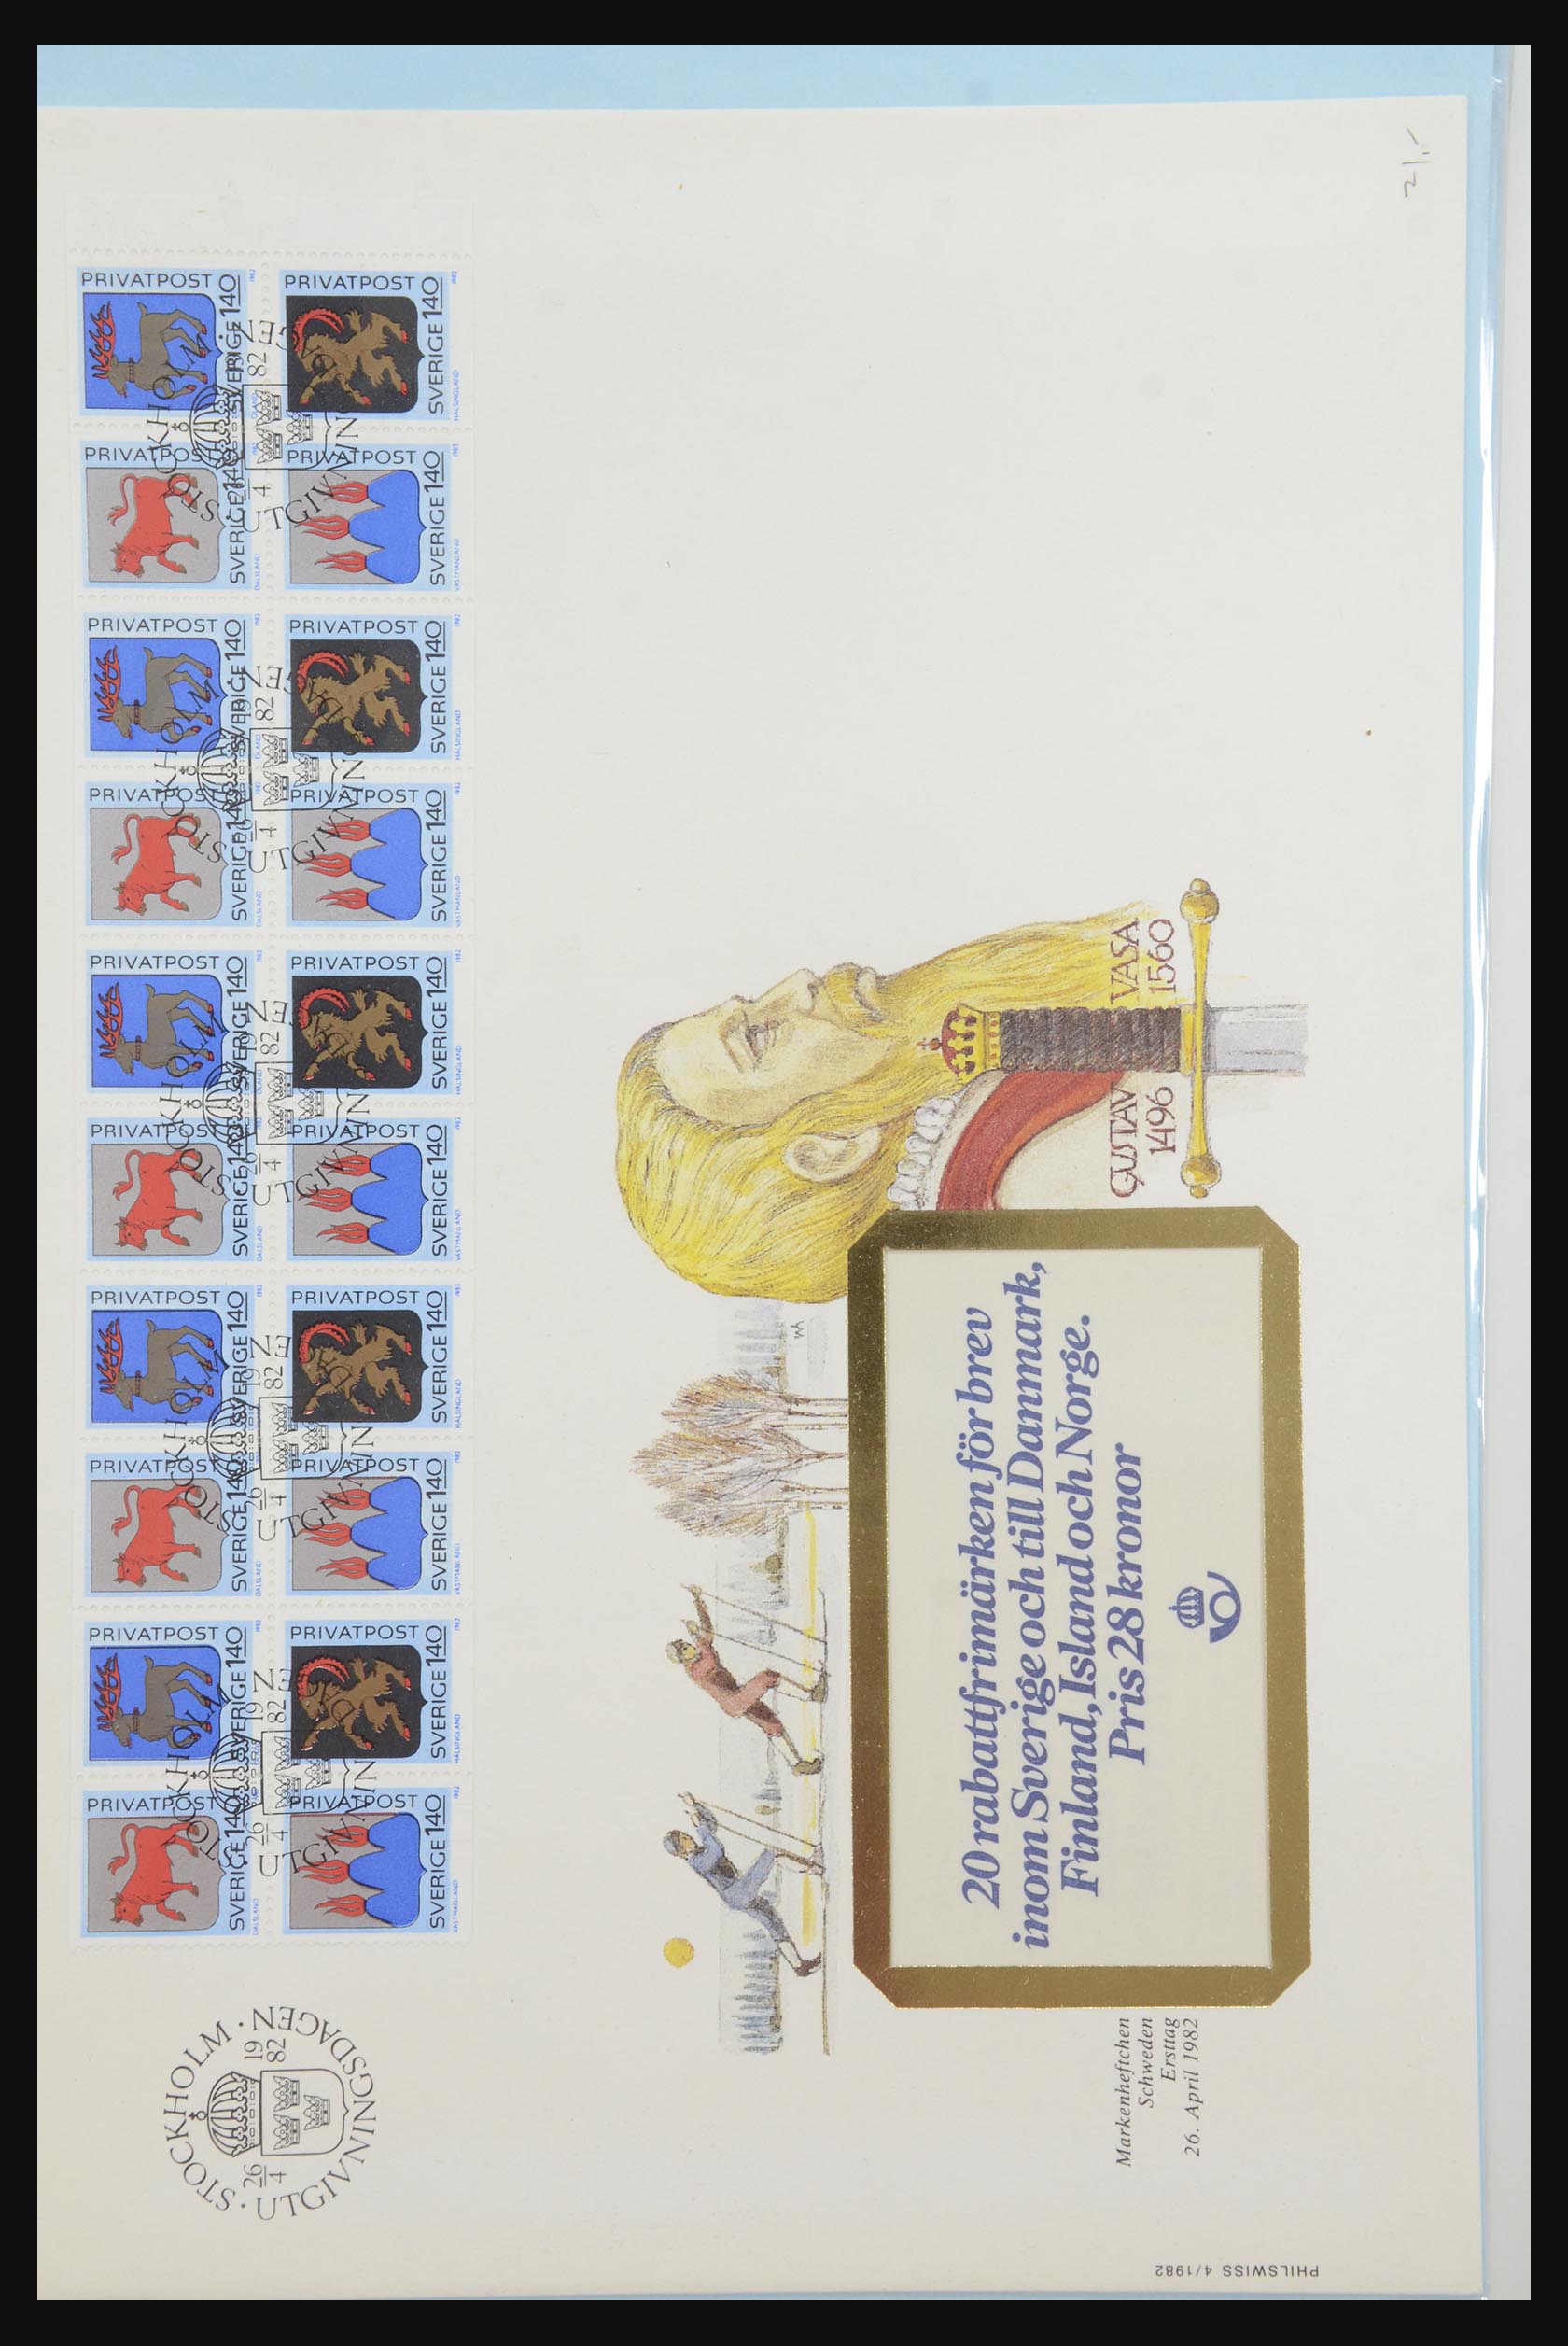 31915 383 - 31915 Western Europe souvenir sheets and stamp booklets on FDC.